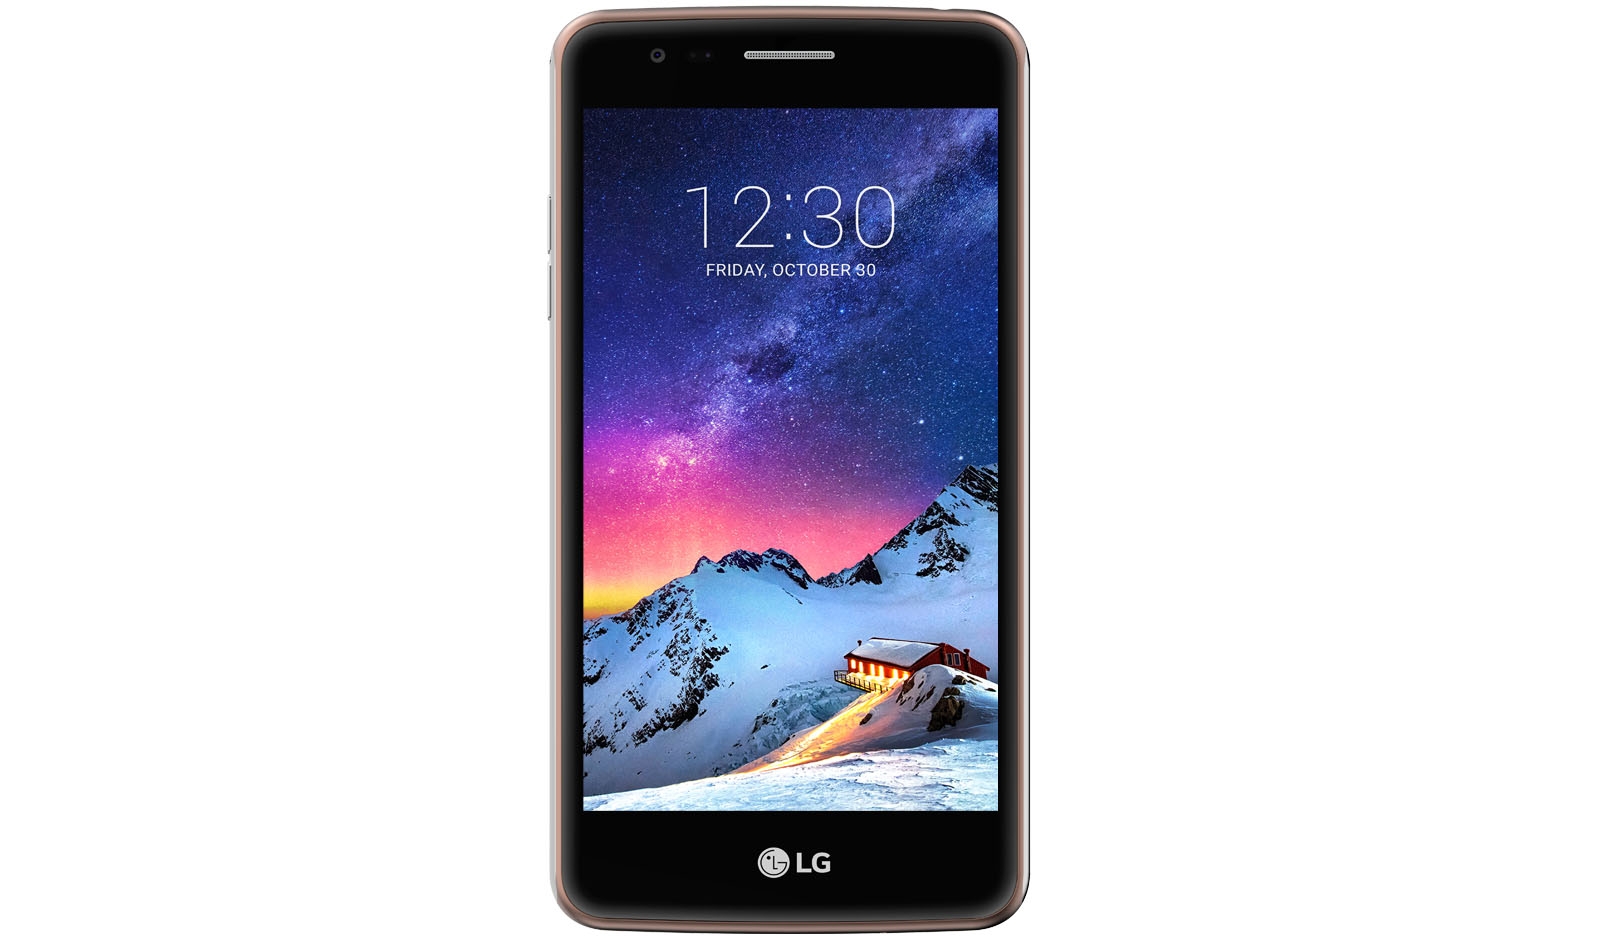 Sidewalk East Timor Really LG K8 (2017) Smartphone Review - NotebookCheck.net Reviews